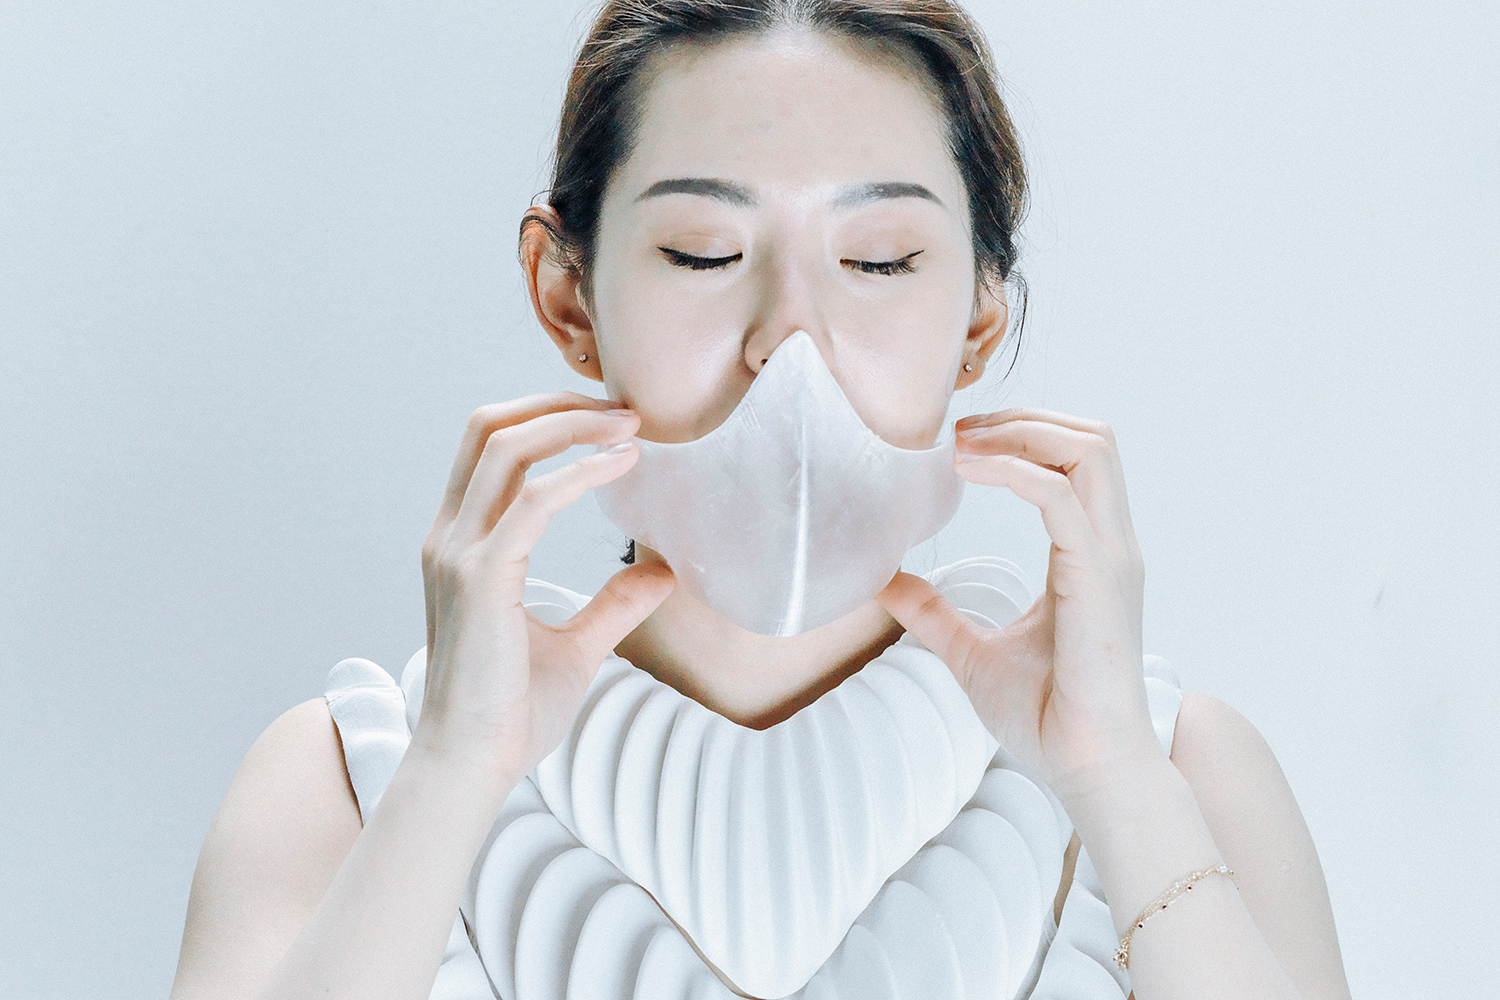 amphibio gills are designed to let humans breathe underwater gallery 4